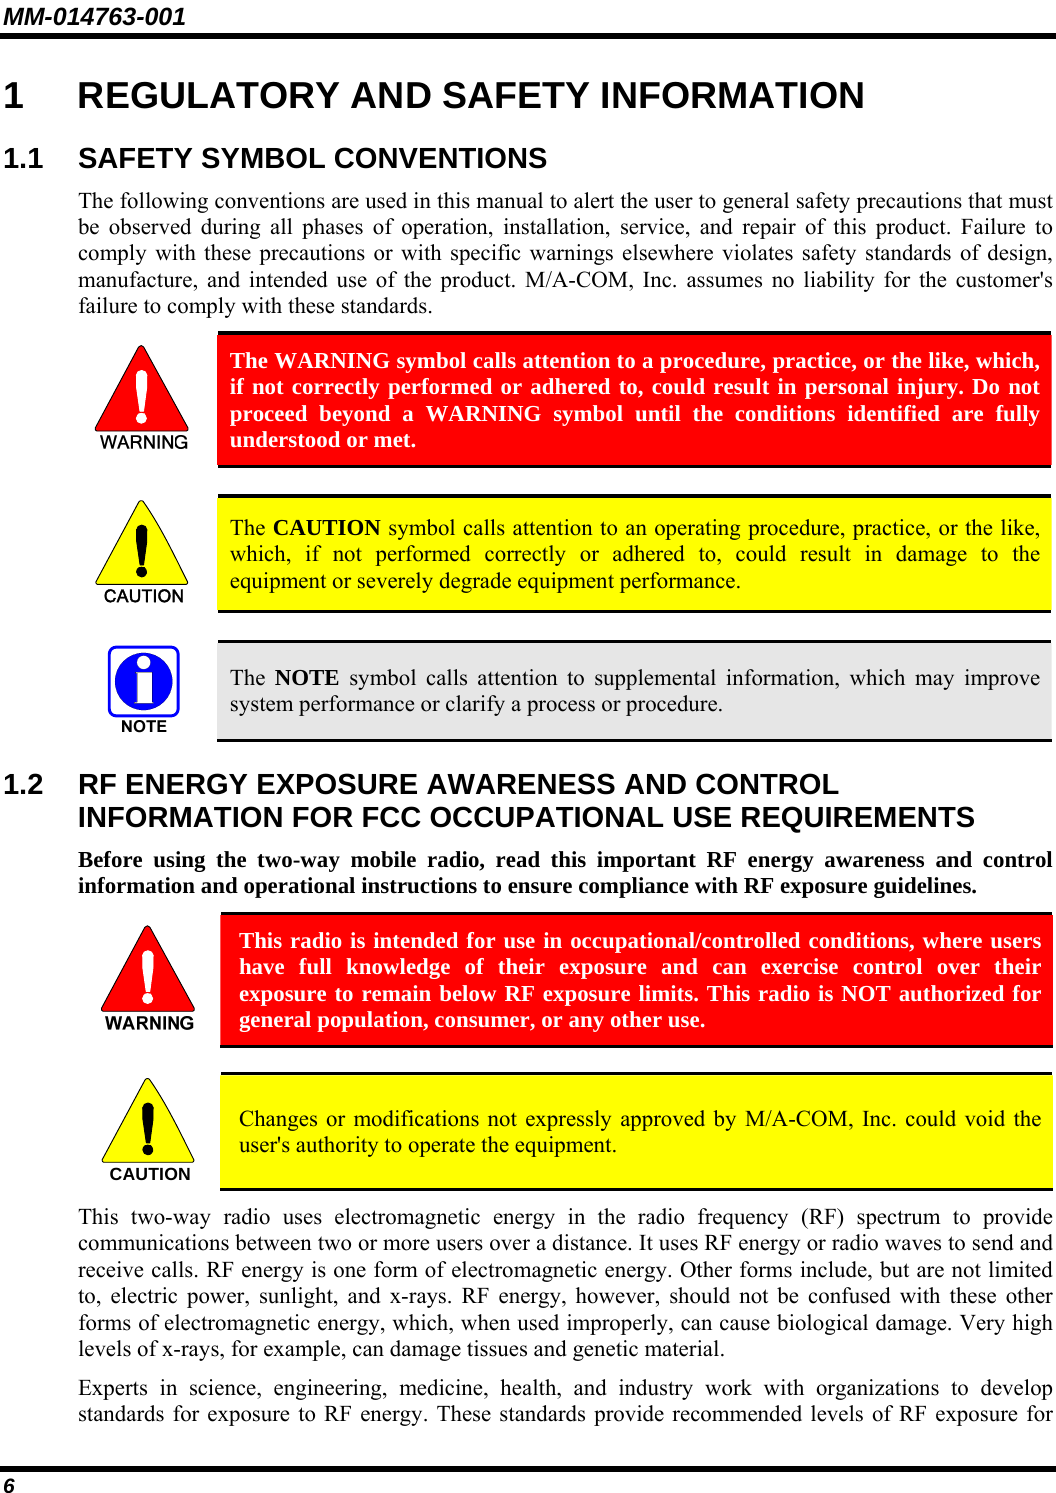 MM-014763-001 6 1  REGULATORY AND SAFETY INFORMATION 1.1 SAFETY SYMBOL CONVENTIONS The following conventions are used in this manual to alert the user to general safety precautions that must be observed during all phases of operation, installation, service, and repair of this product. Failure to comply with these precautions or with specific warnings elsewhere violates safety standards of design, manufacture, and intended use of the product. M/A-COM, Inc. assumes no liability for the customer&apos;s failure to comply with these standards.  The WARNING symbol calls attention to a procedure, practice, or the like, which, if not correctly performed or adhered to, could result in personal injury. Do not proceed beyond a WARNING symbol until the conditions identified are fully understood or met.   CAUTION  The CAUTION symbol calls attention to an operating procedure, practice, or the like, which, if not performed correctly or adhered to, could result in damage to the equipment or severely degrade equipment performance.    The  NOTE symbol calls attention to supplemental information, which may improve system performance or clarify a process or procedure. 1.2  RF ENERGY EXPOSURE AWARENESS AND CONTROL INFORMATION FOR FCC OCCUPATIONAL USE REQUIREMENTS Before using the two-way mobile radio, read this important RF energy awareness and control information and operational instructions to ensure compliance with RF exposure guidelines.  This radio is intended for use in occupational/controlled conditions, where users have full knowledge of their exposure and can exercise control over their exposure to remain below RF exposure limits. This radio is NOT authorized for general population, consumer, or any other use.  CAUTION  Changes or modifications not expressly approved by M/A-COM, Inc. could void the user&apos;s authority to operate the equipment. This two-way radio uses electromagnetic energy in the radio frequency (RF) spectrum to provide communications between two or more users over a distance. It uses RF energy or radio waves to send and receive calls. RF energy is one form of electromagnetic energy. Other forms include, but are not limited to, electric power, sunlight, and x-rays. RF energy, however, should not be confused with these other forms of electromagnetic energy, which, when used improperly, can cause biological damage. Very high levels of x-rays, for example, can damage tissues and genetic material. Experts in science, engineering, medicine, health, and industry work with organizations to develop standards for exposure to RF energy. These standards provide recommended levels of RF exposure for 